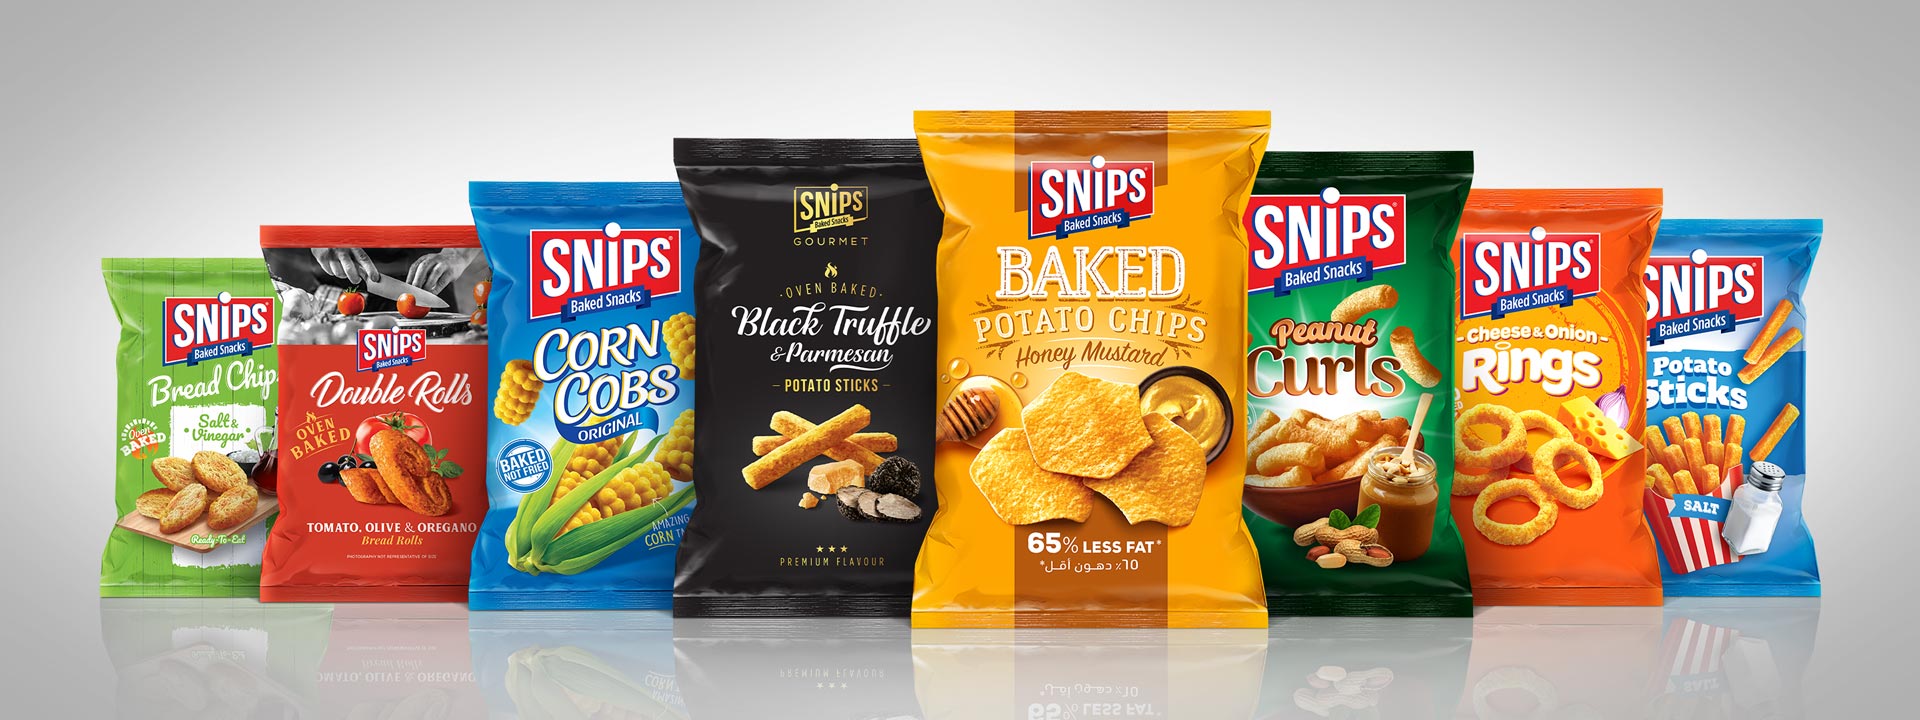 Snips Product Lineup Double Rolls Bread Chips Curls Sticks Corn Cobs